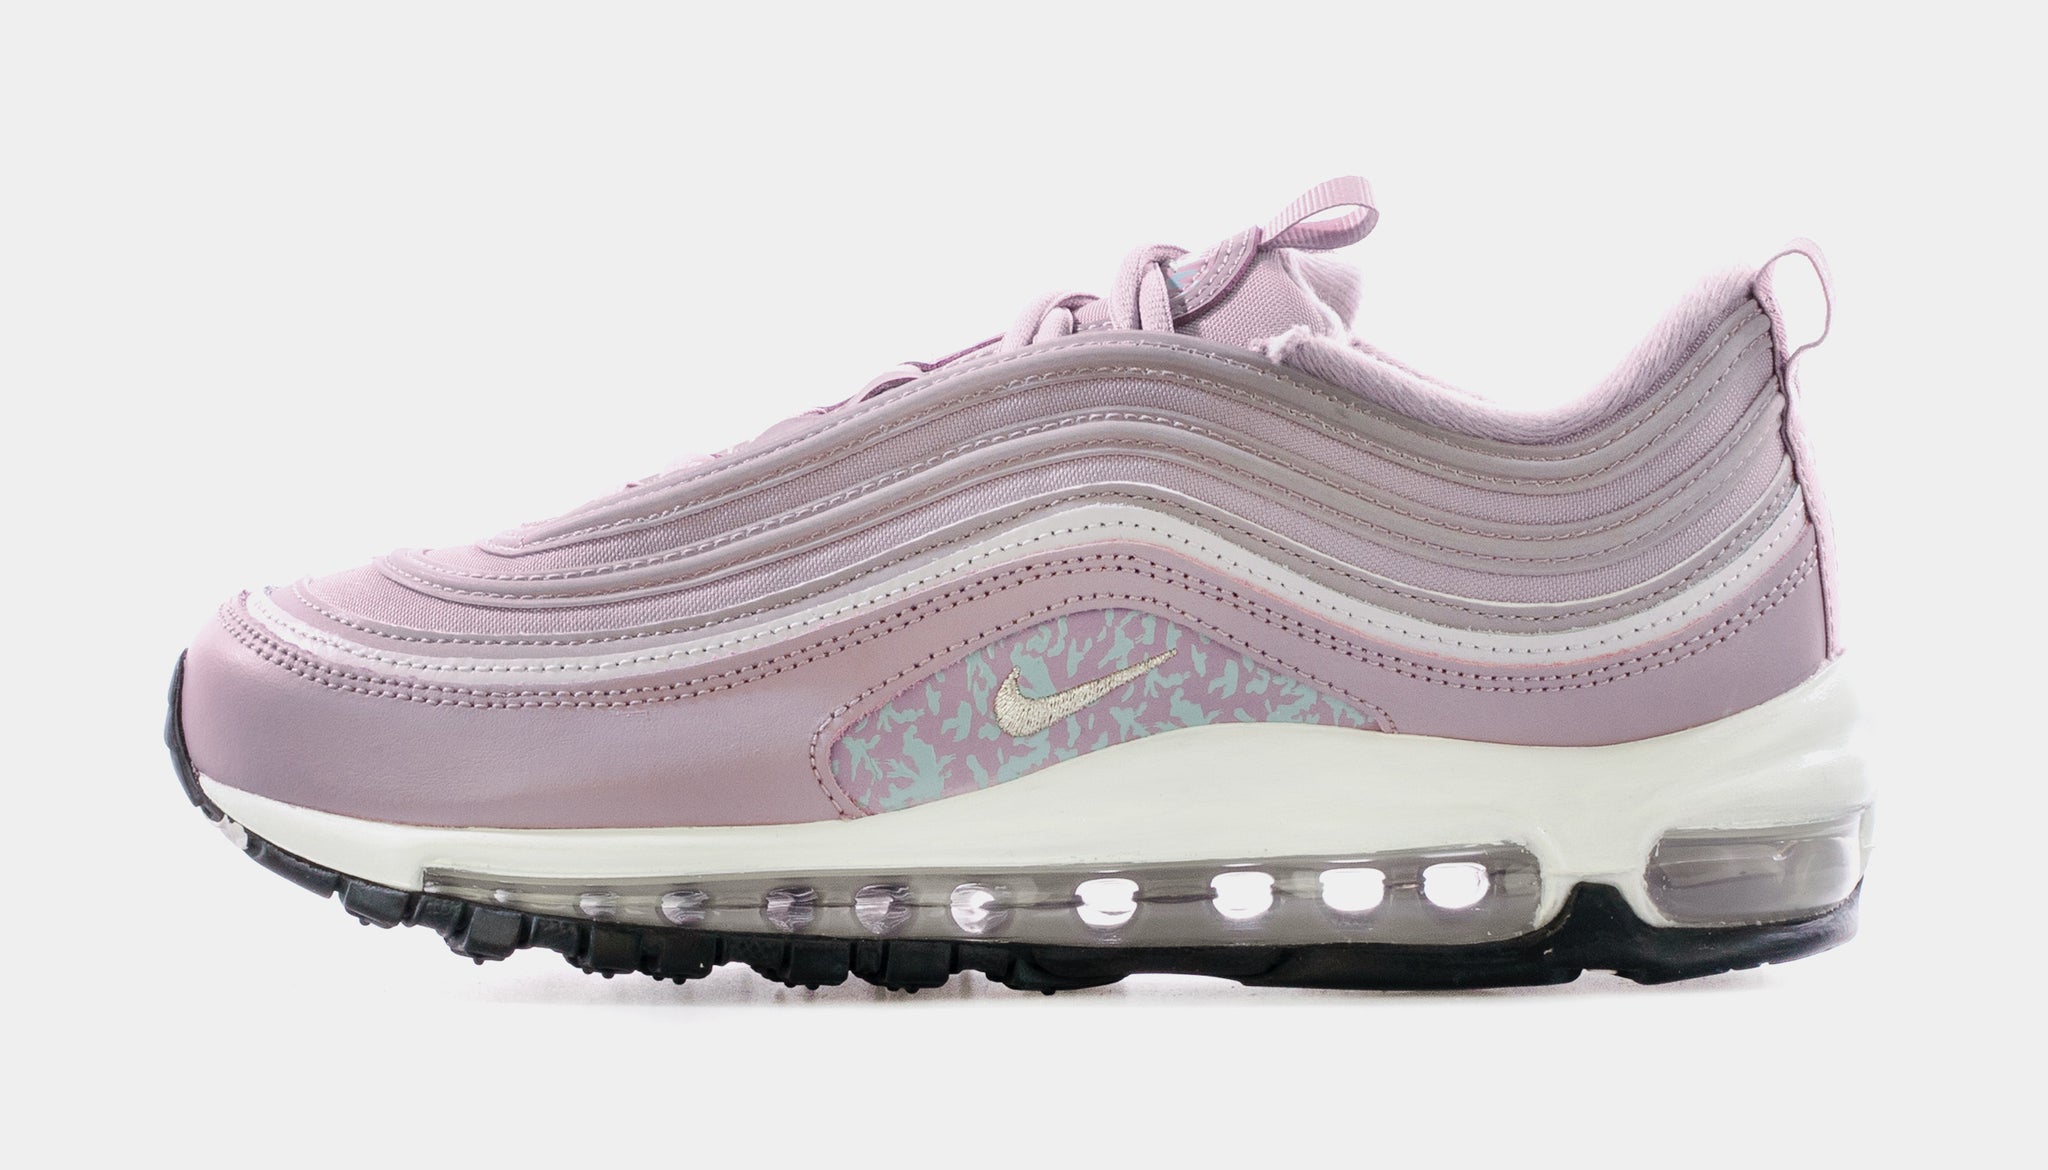 Meningsfuld Dag Udholdenhed Nike Air Max 97 Plum Fog Womens Lifestyle Shoes Pink DH0558-500 – Shoe  Palace